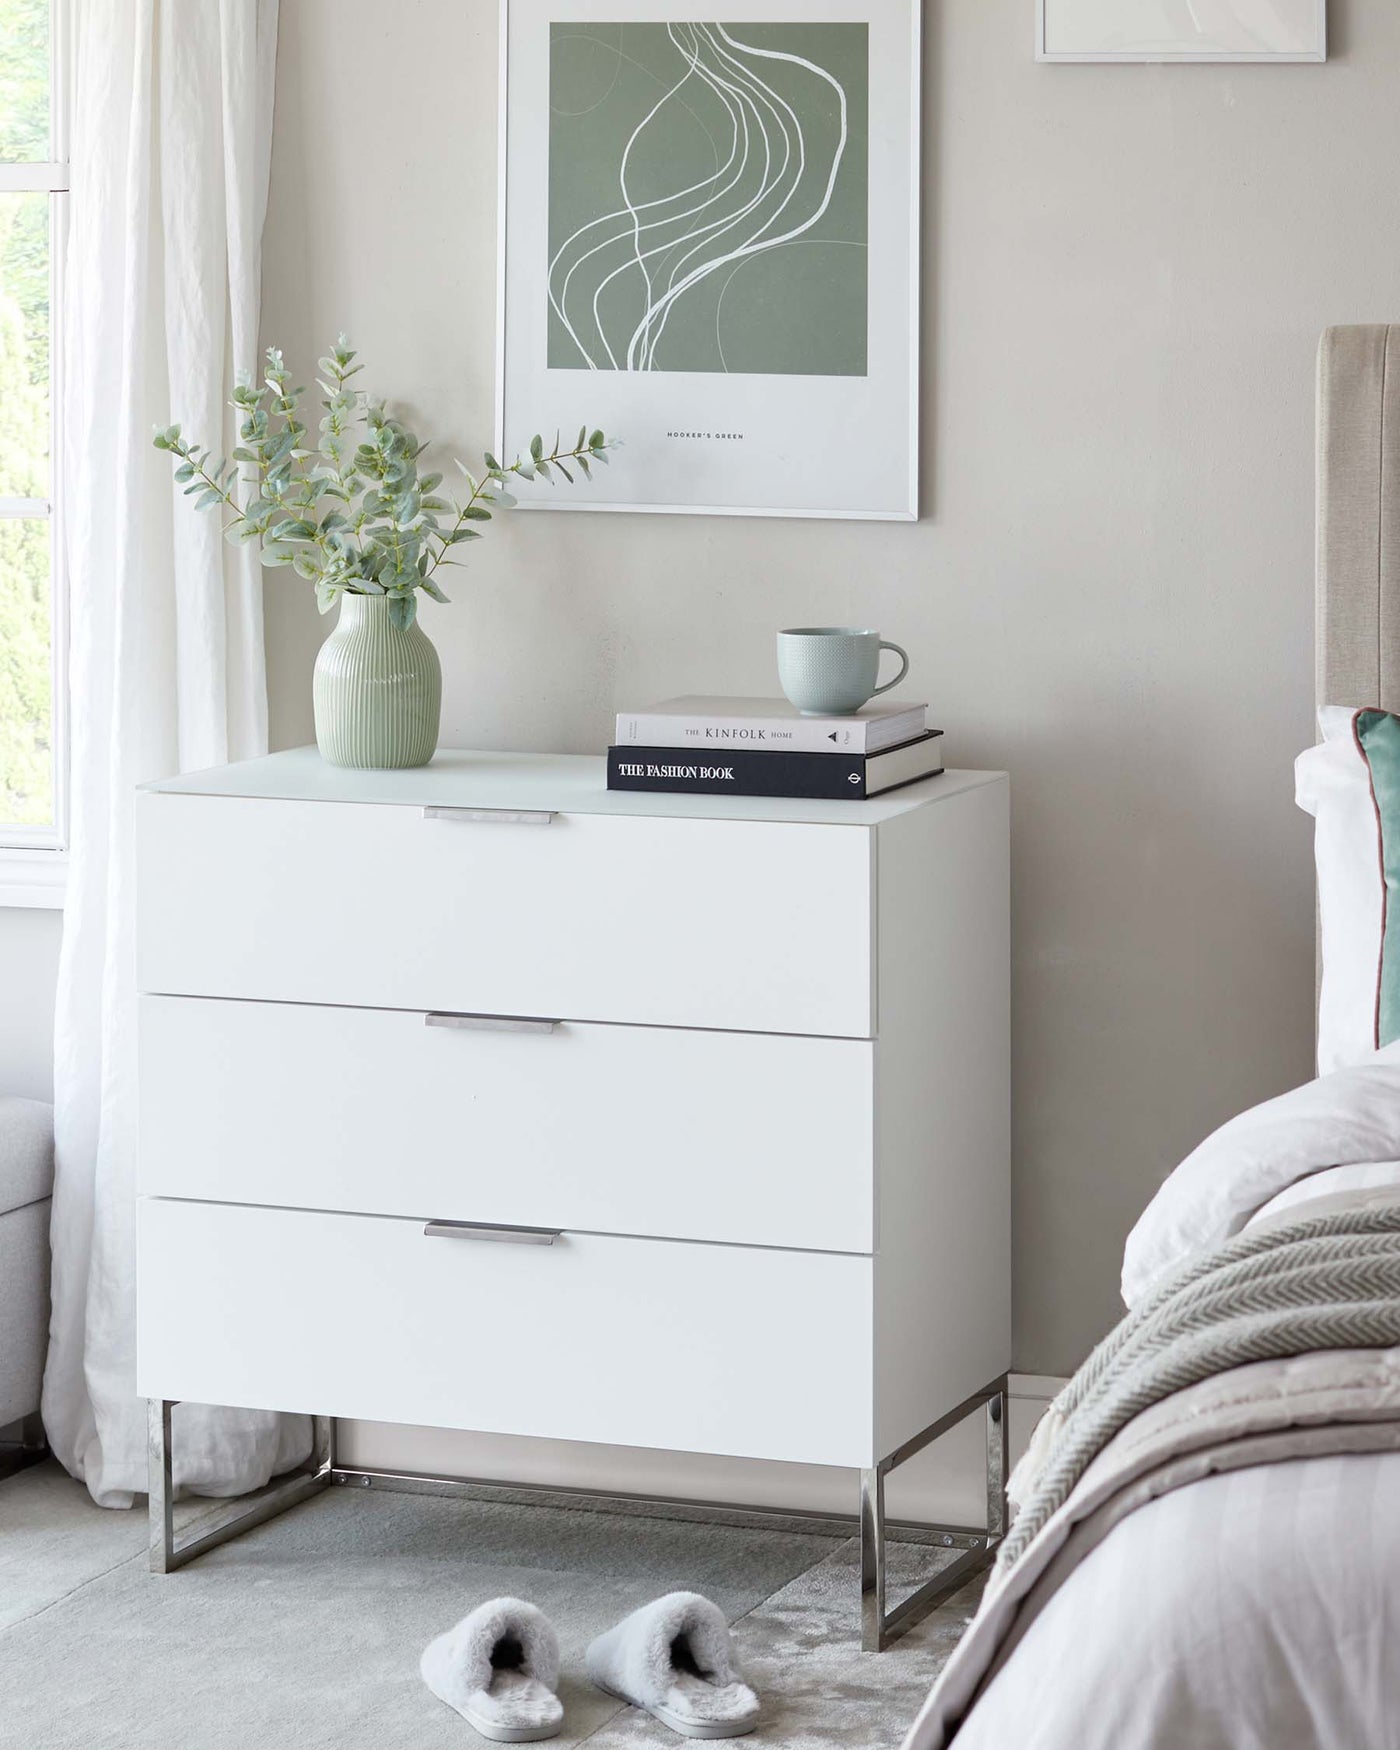 A modern white three-drawer chest with sleek handles and metal leg accents, situated in a softly lit bedroom setting.